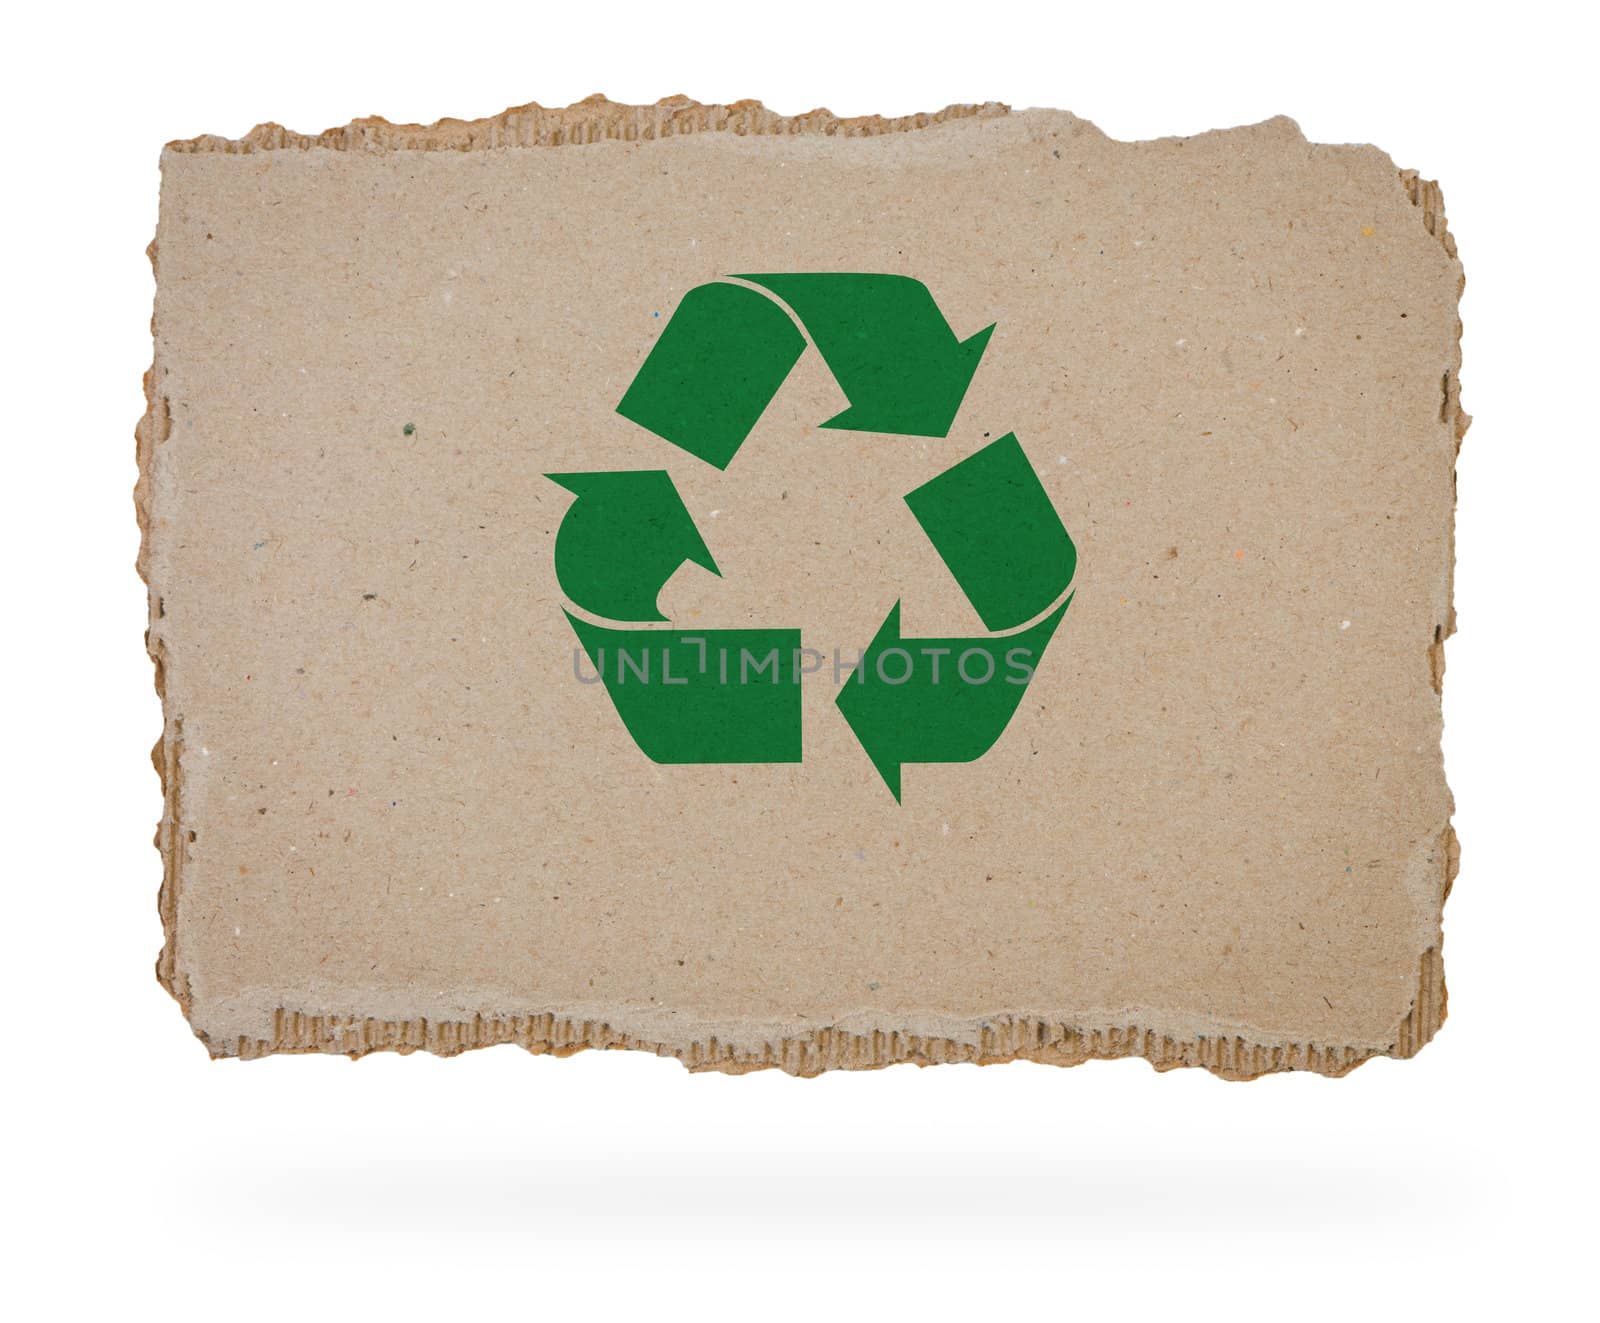 Green resecycle sign on piece of cardboard.